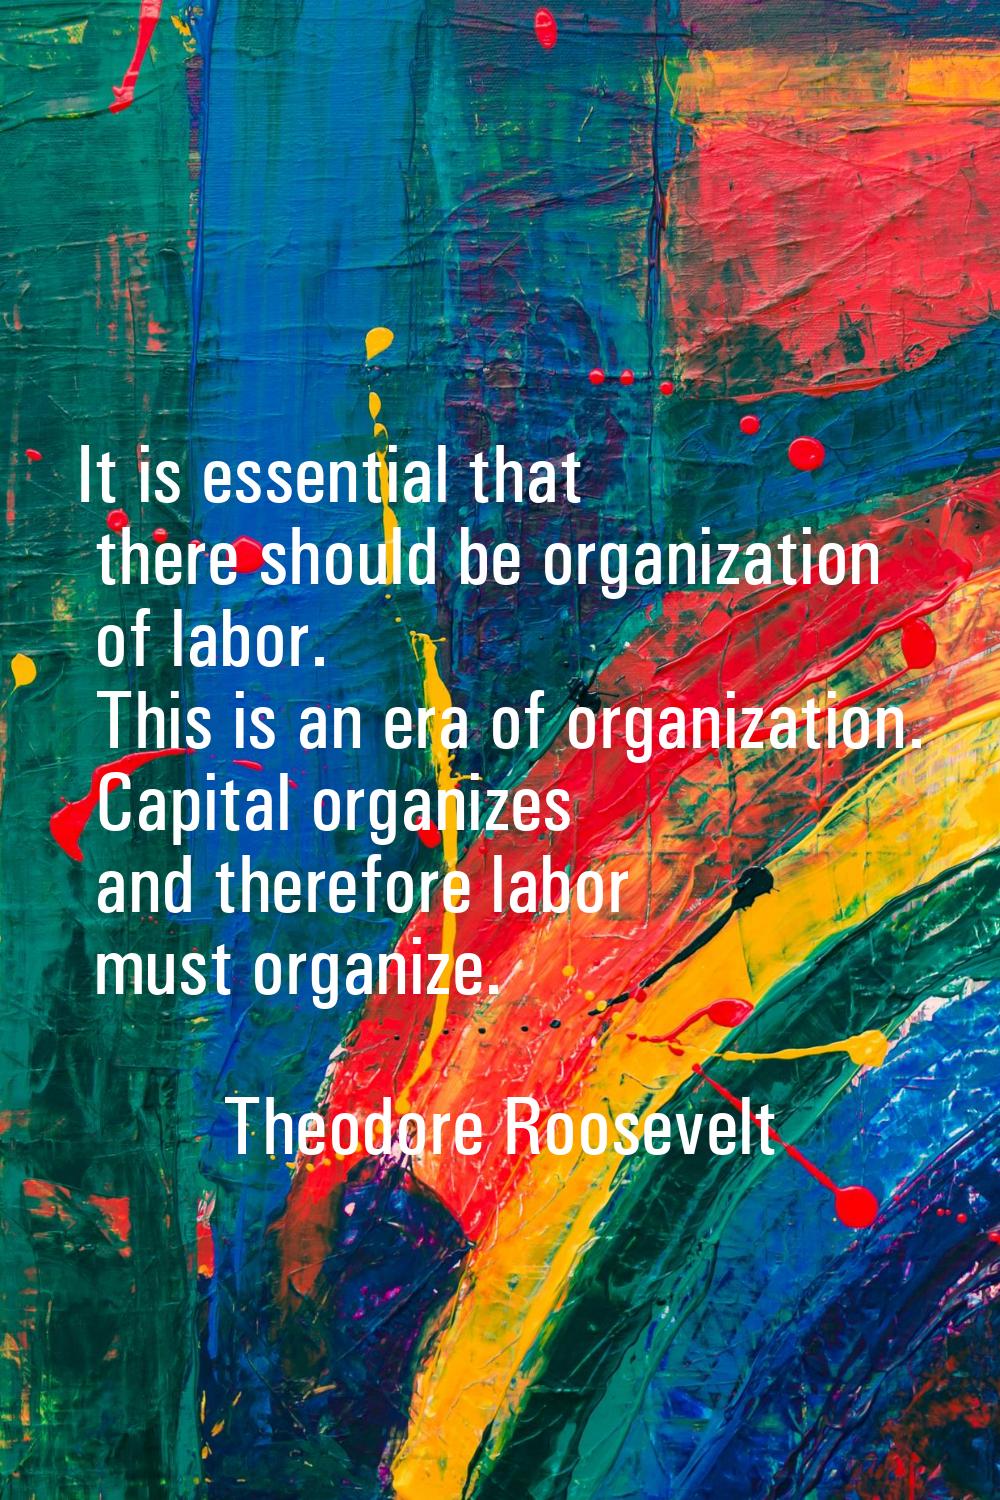 It is essential that there should be organization of labor. This is an era of organization. Capital